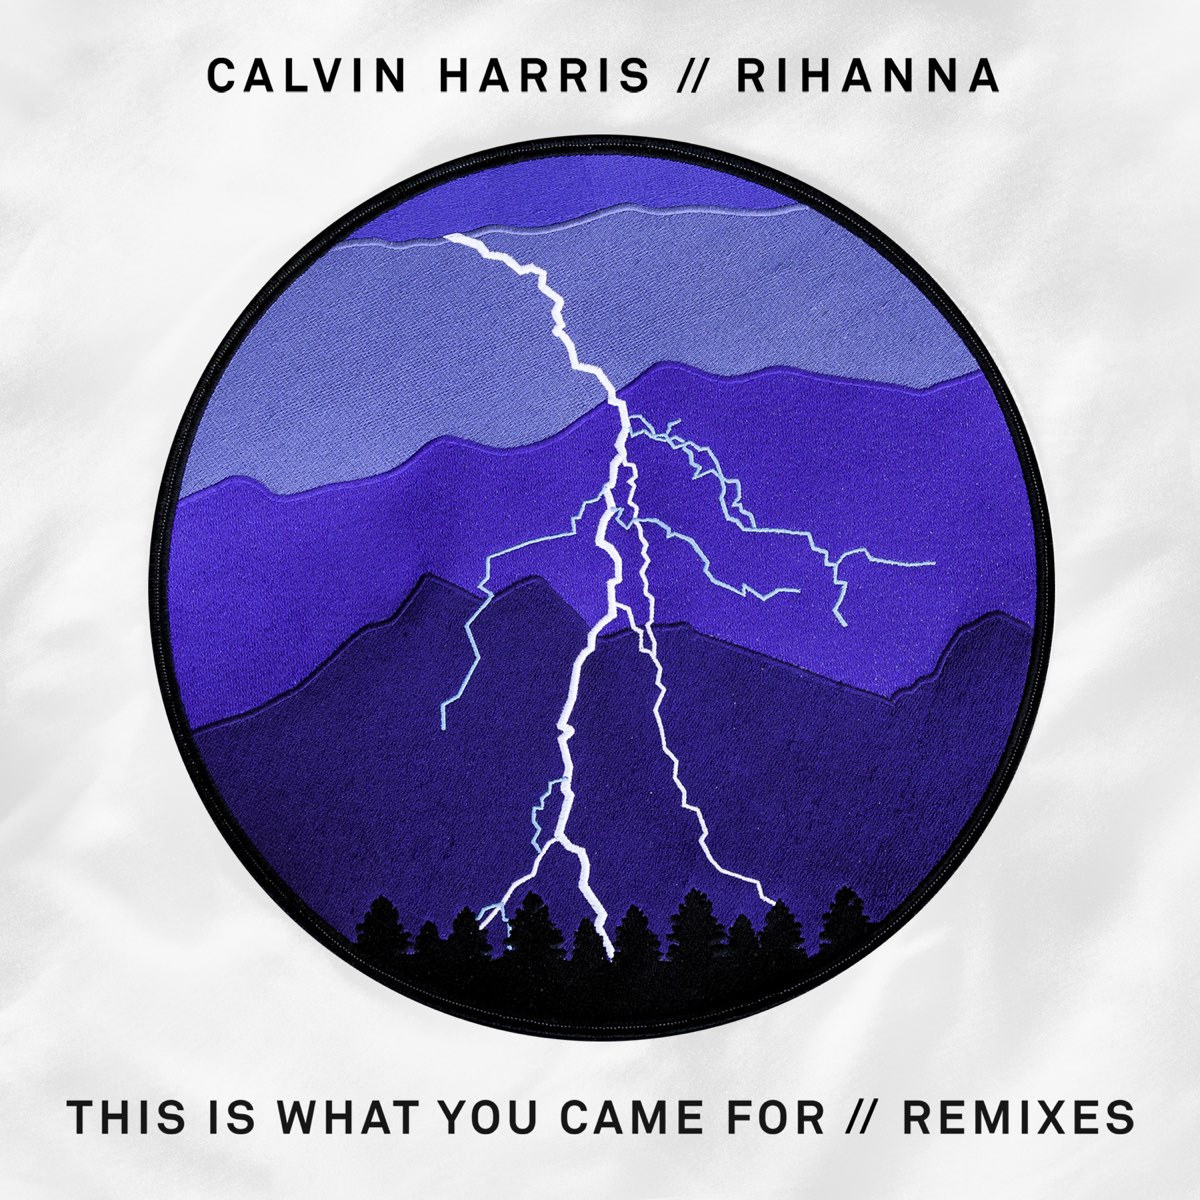 This Is What You Came For [Remixes] - EP by Calvin Harris & Rihanna on  Apple Music